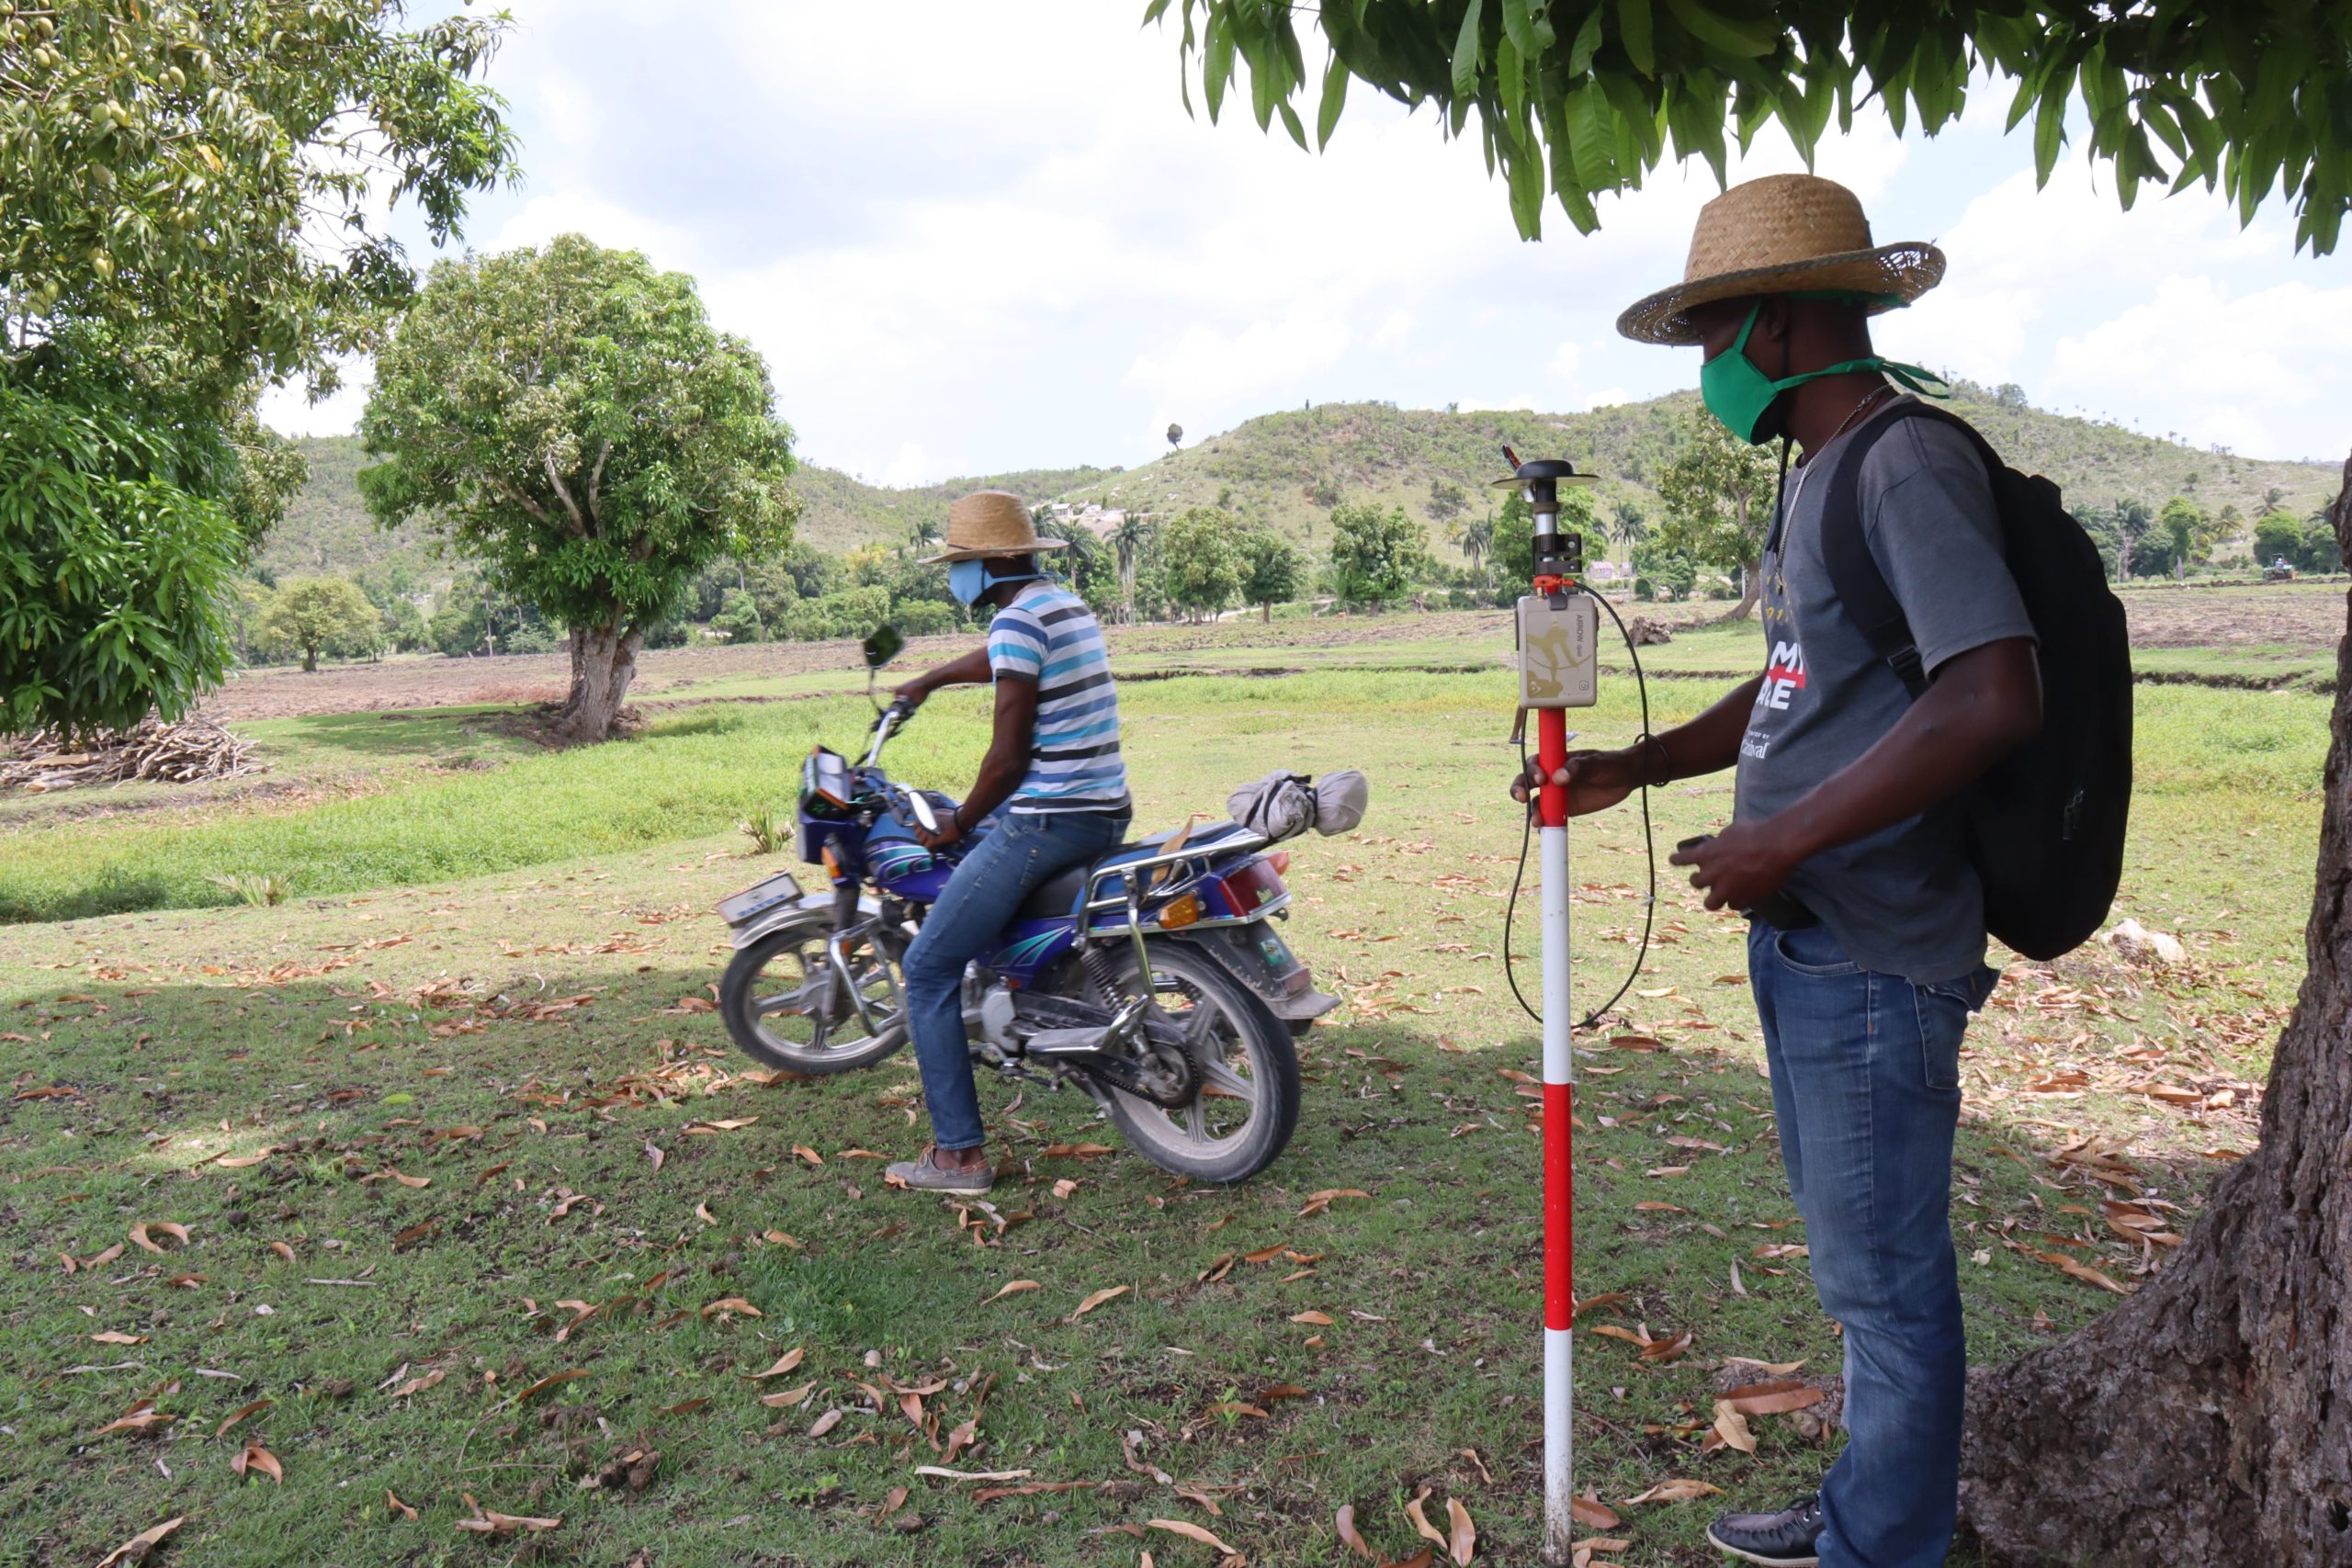 ADF Haiti Data Collection with Eos Arrow Gold GNSS Receiver and ArcGIS Field Maps on a Motorcycle